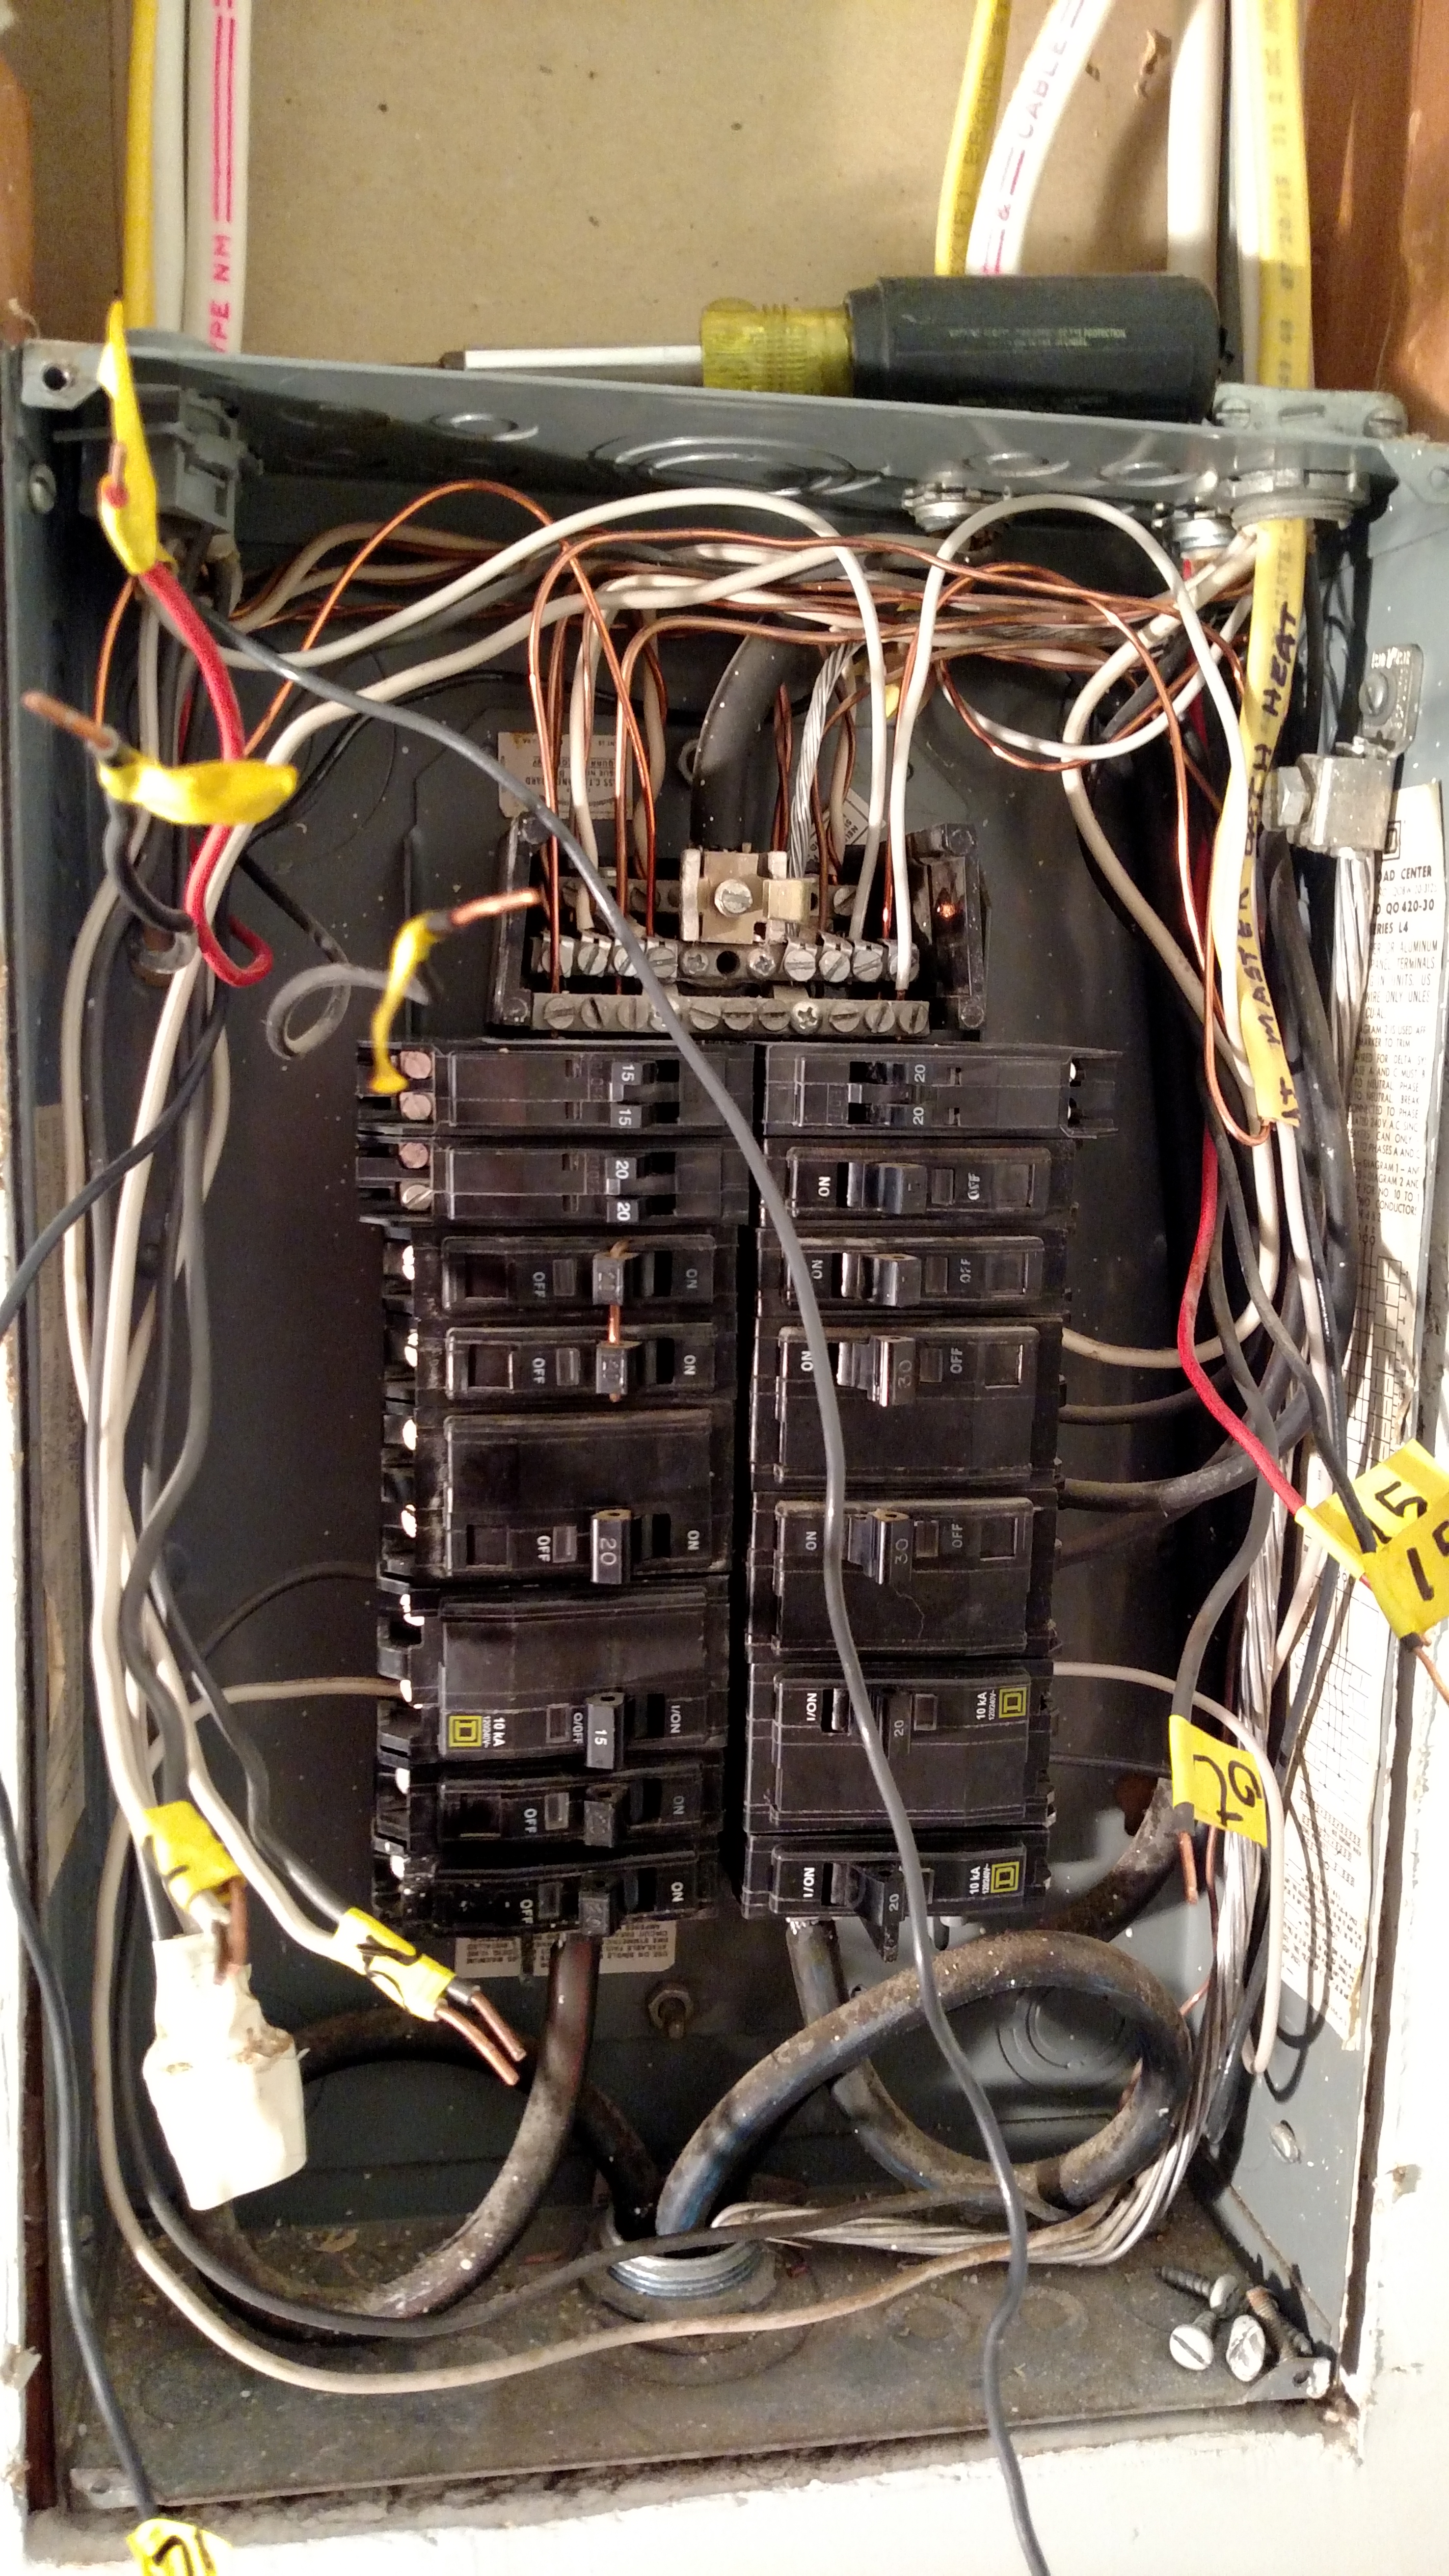 The upstairs breaker panel that we moved into was poorly wired, cramped, and needed replacing